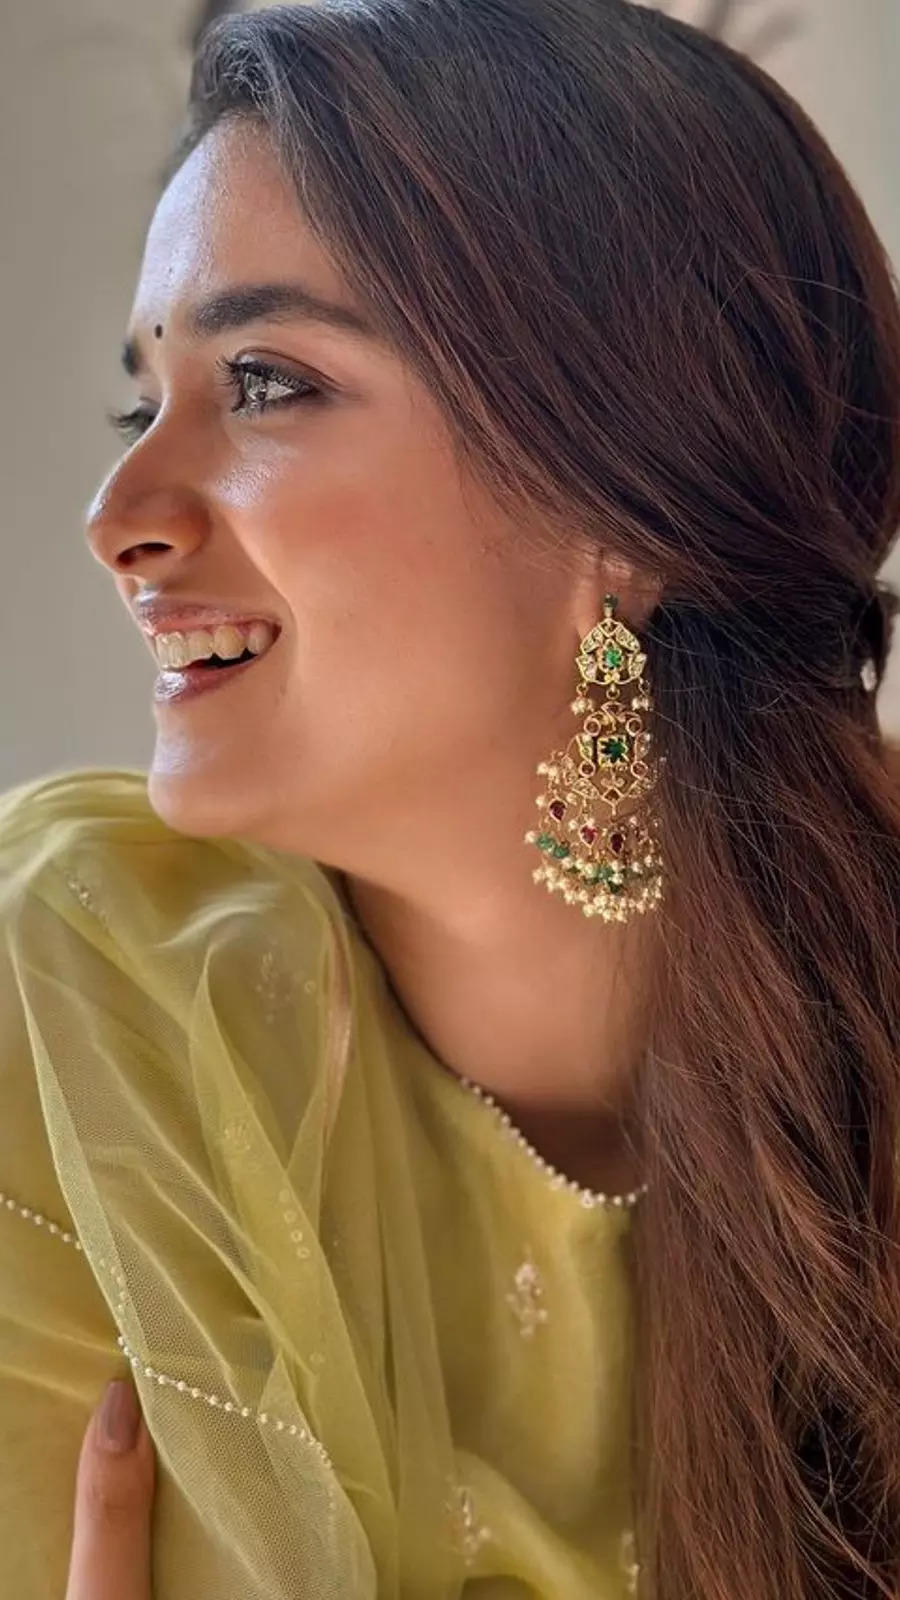 Smiling poses inspired by Keerthy Suresh